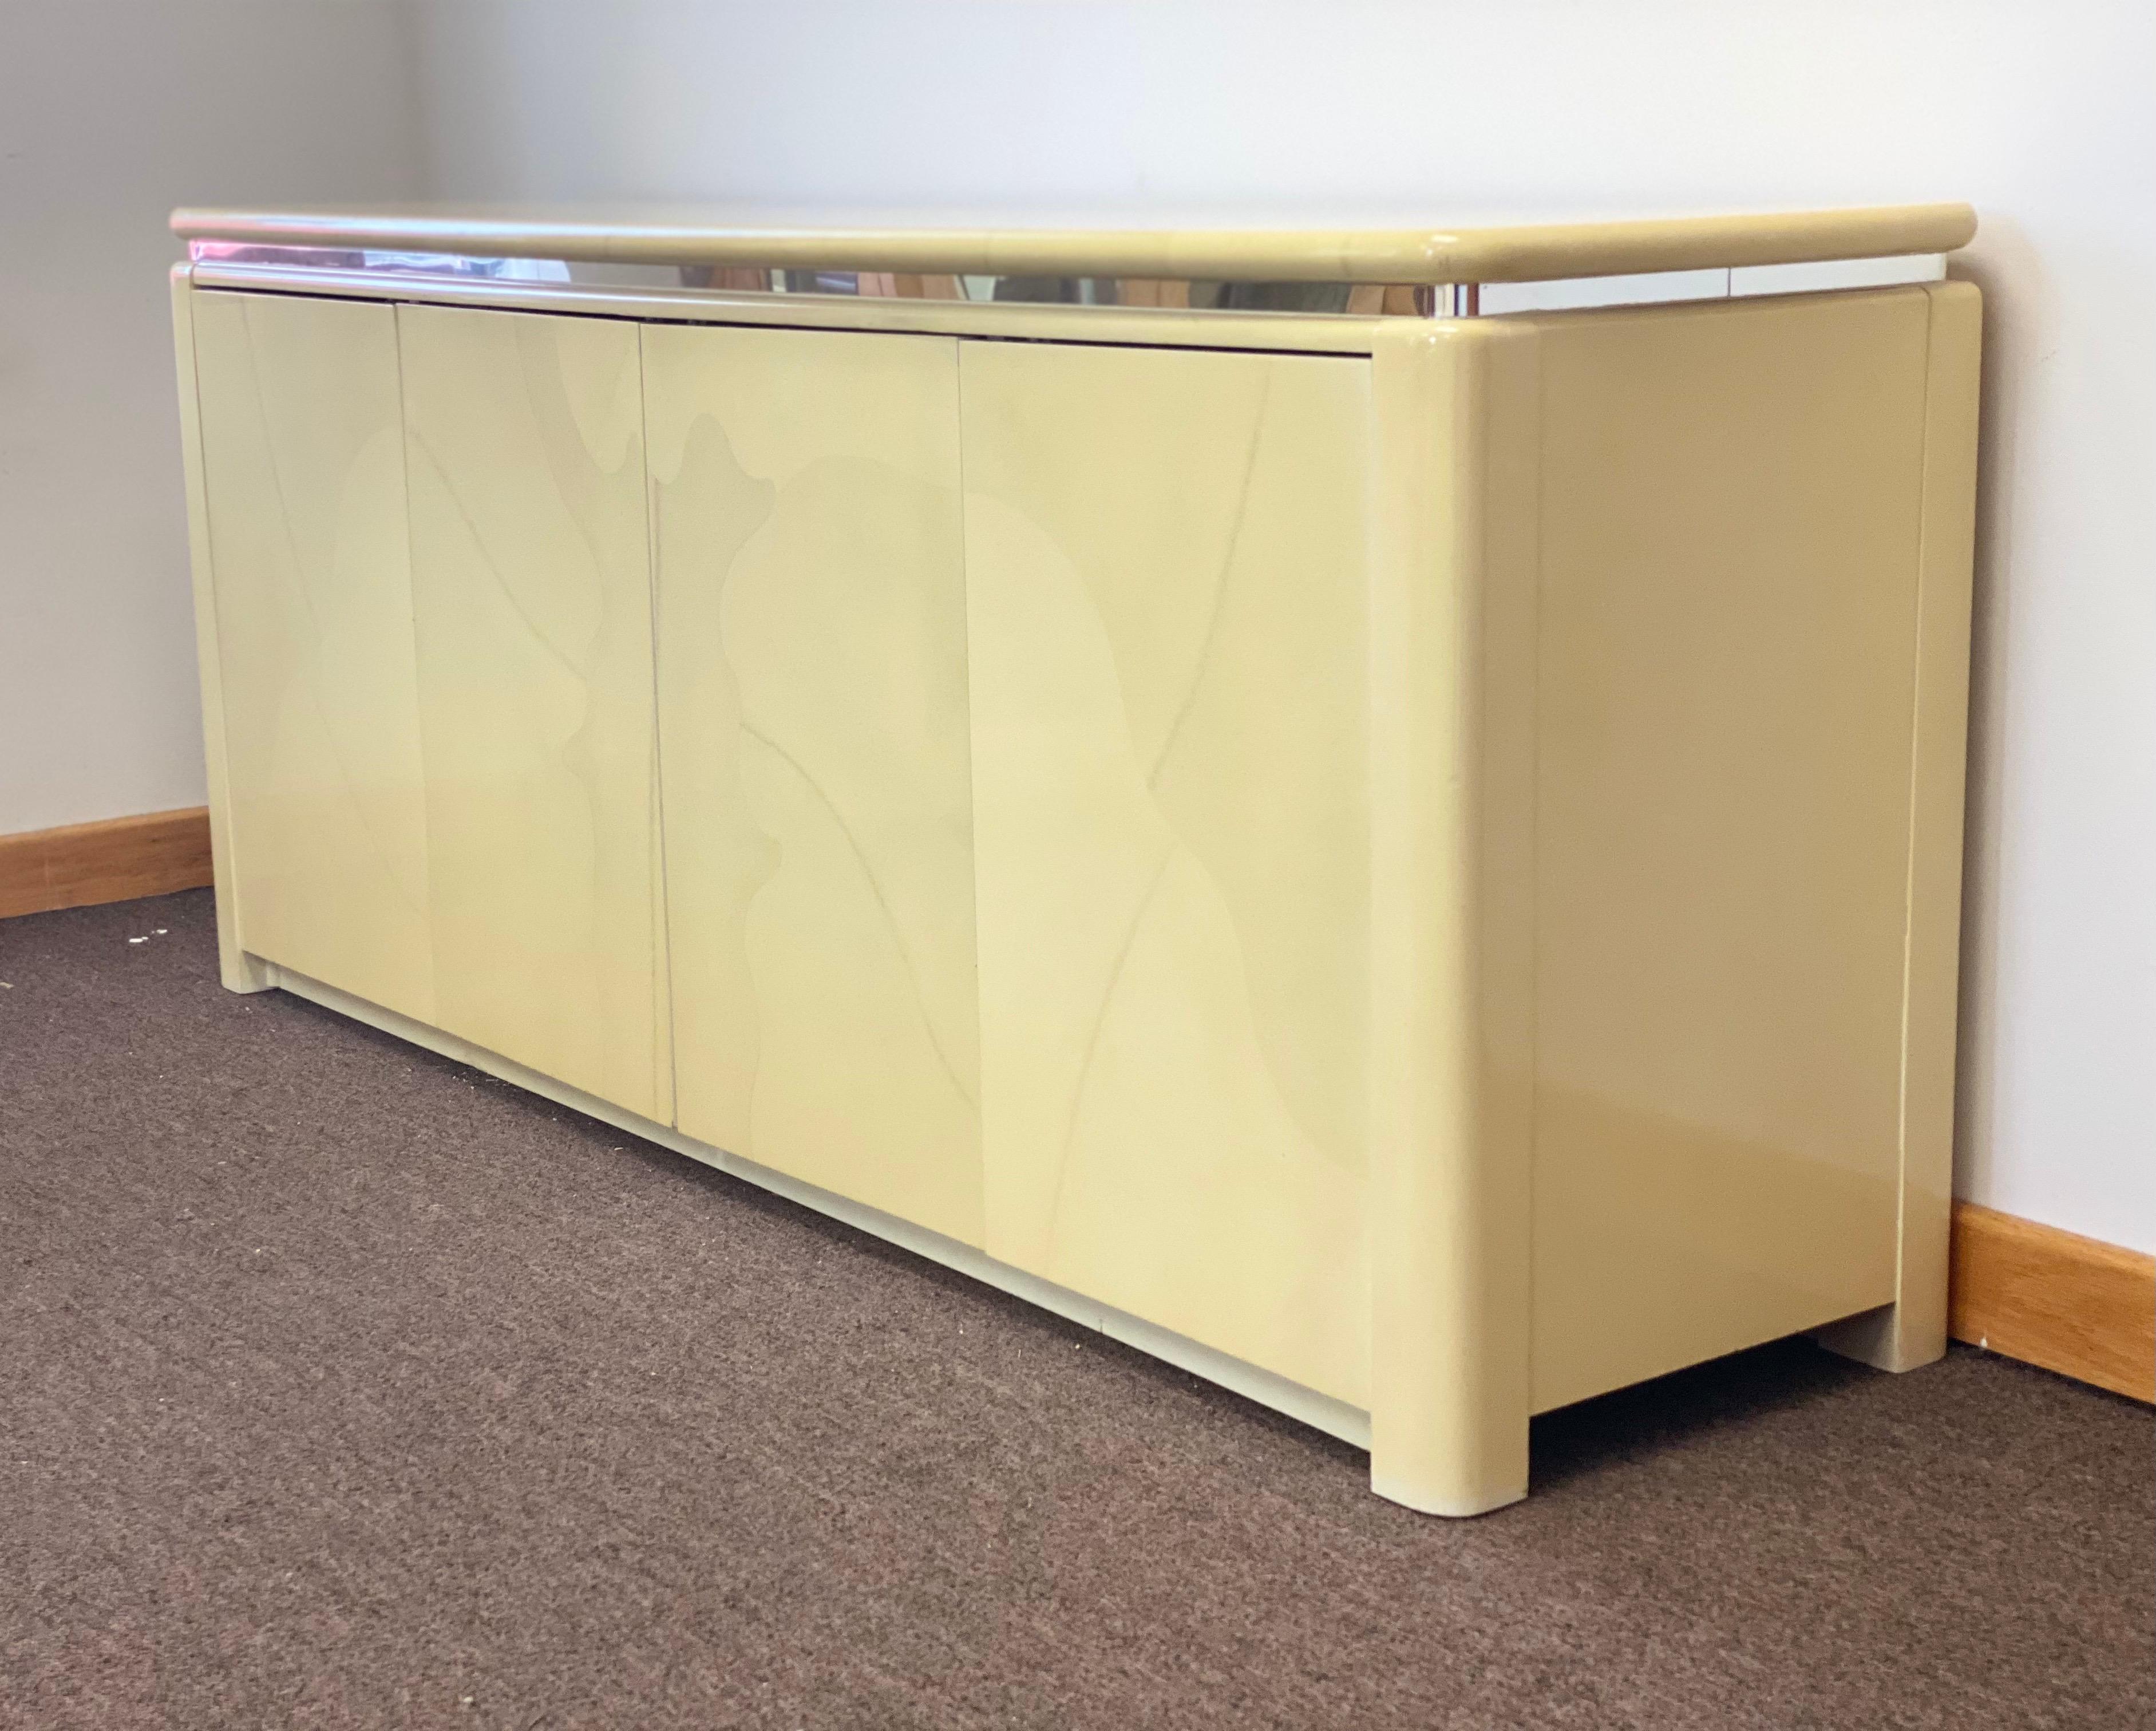 We are very pleased to offer a chic credenza in the style of Karl Springer, circa the 1970s. This six feet long sideboard showcases a lacquered goatskin finish with a chrome banding trim. The spacious interior provides plenty of versatile storage.